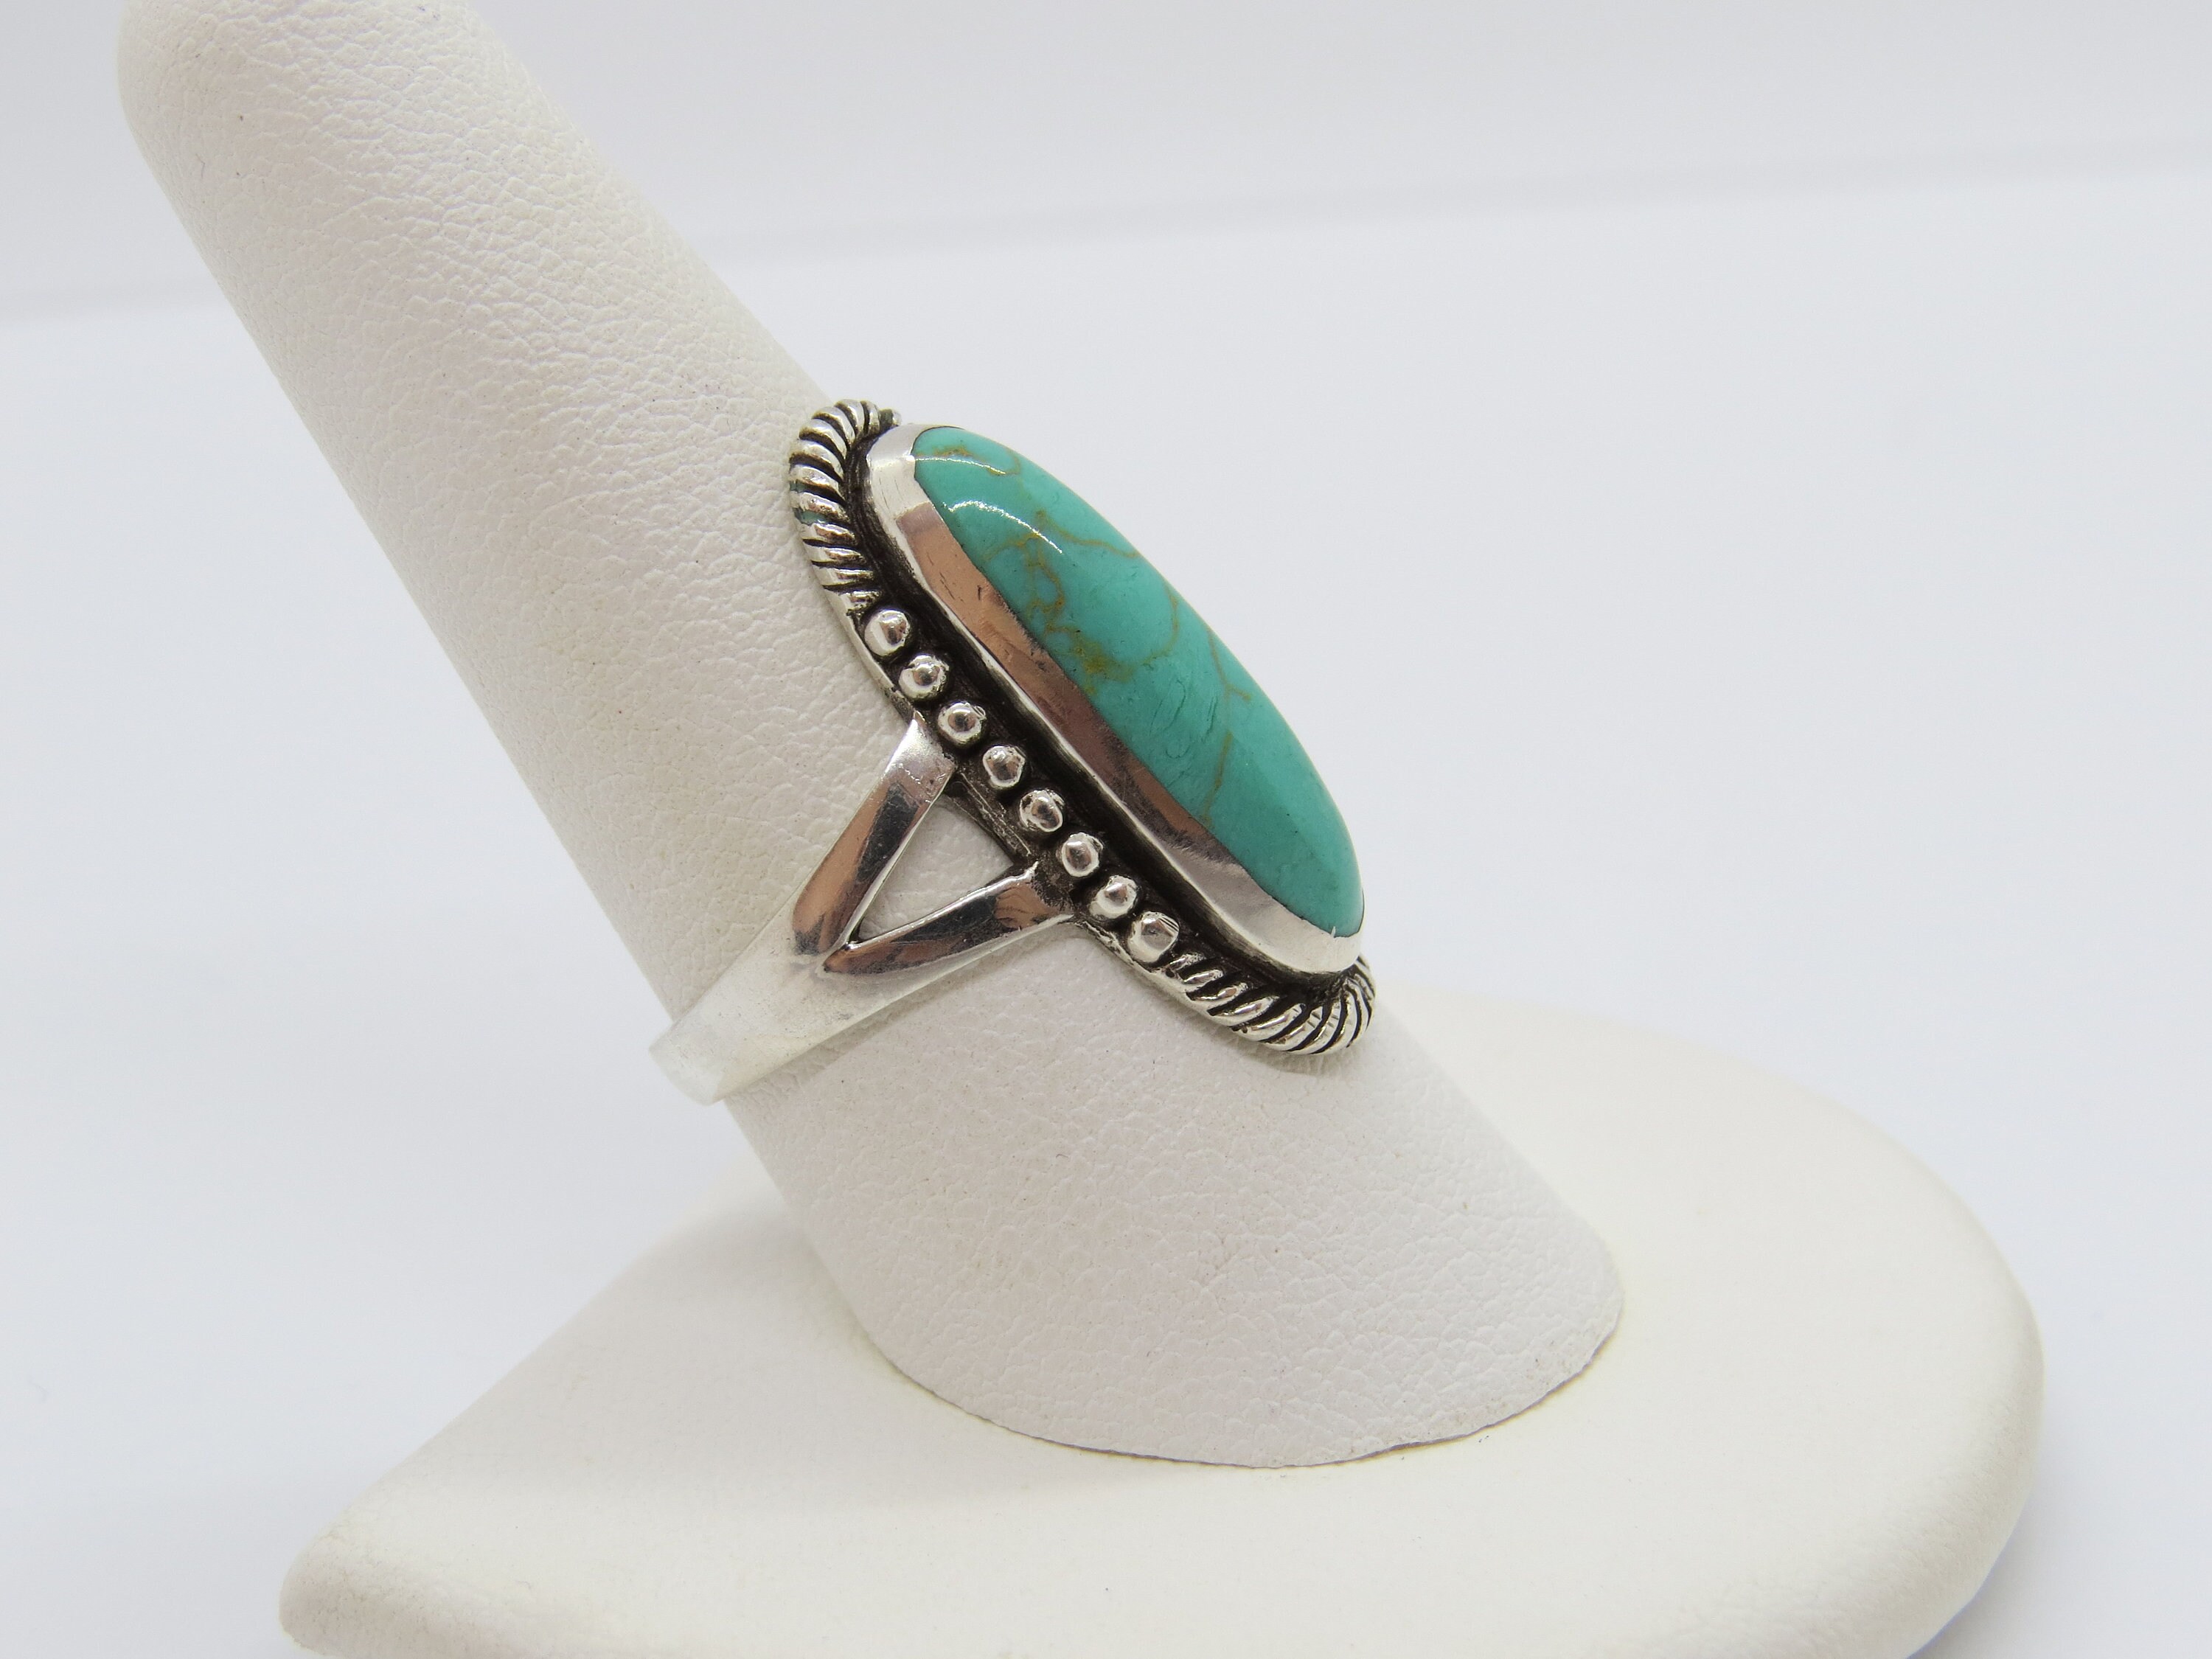 Vintage Sterling Silver Turquoise Long Ring Size 9 | Etsy